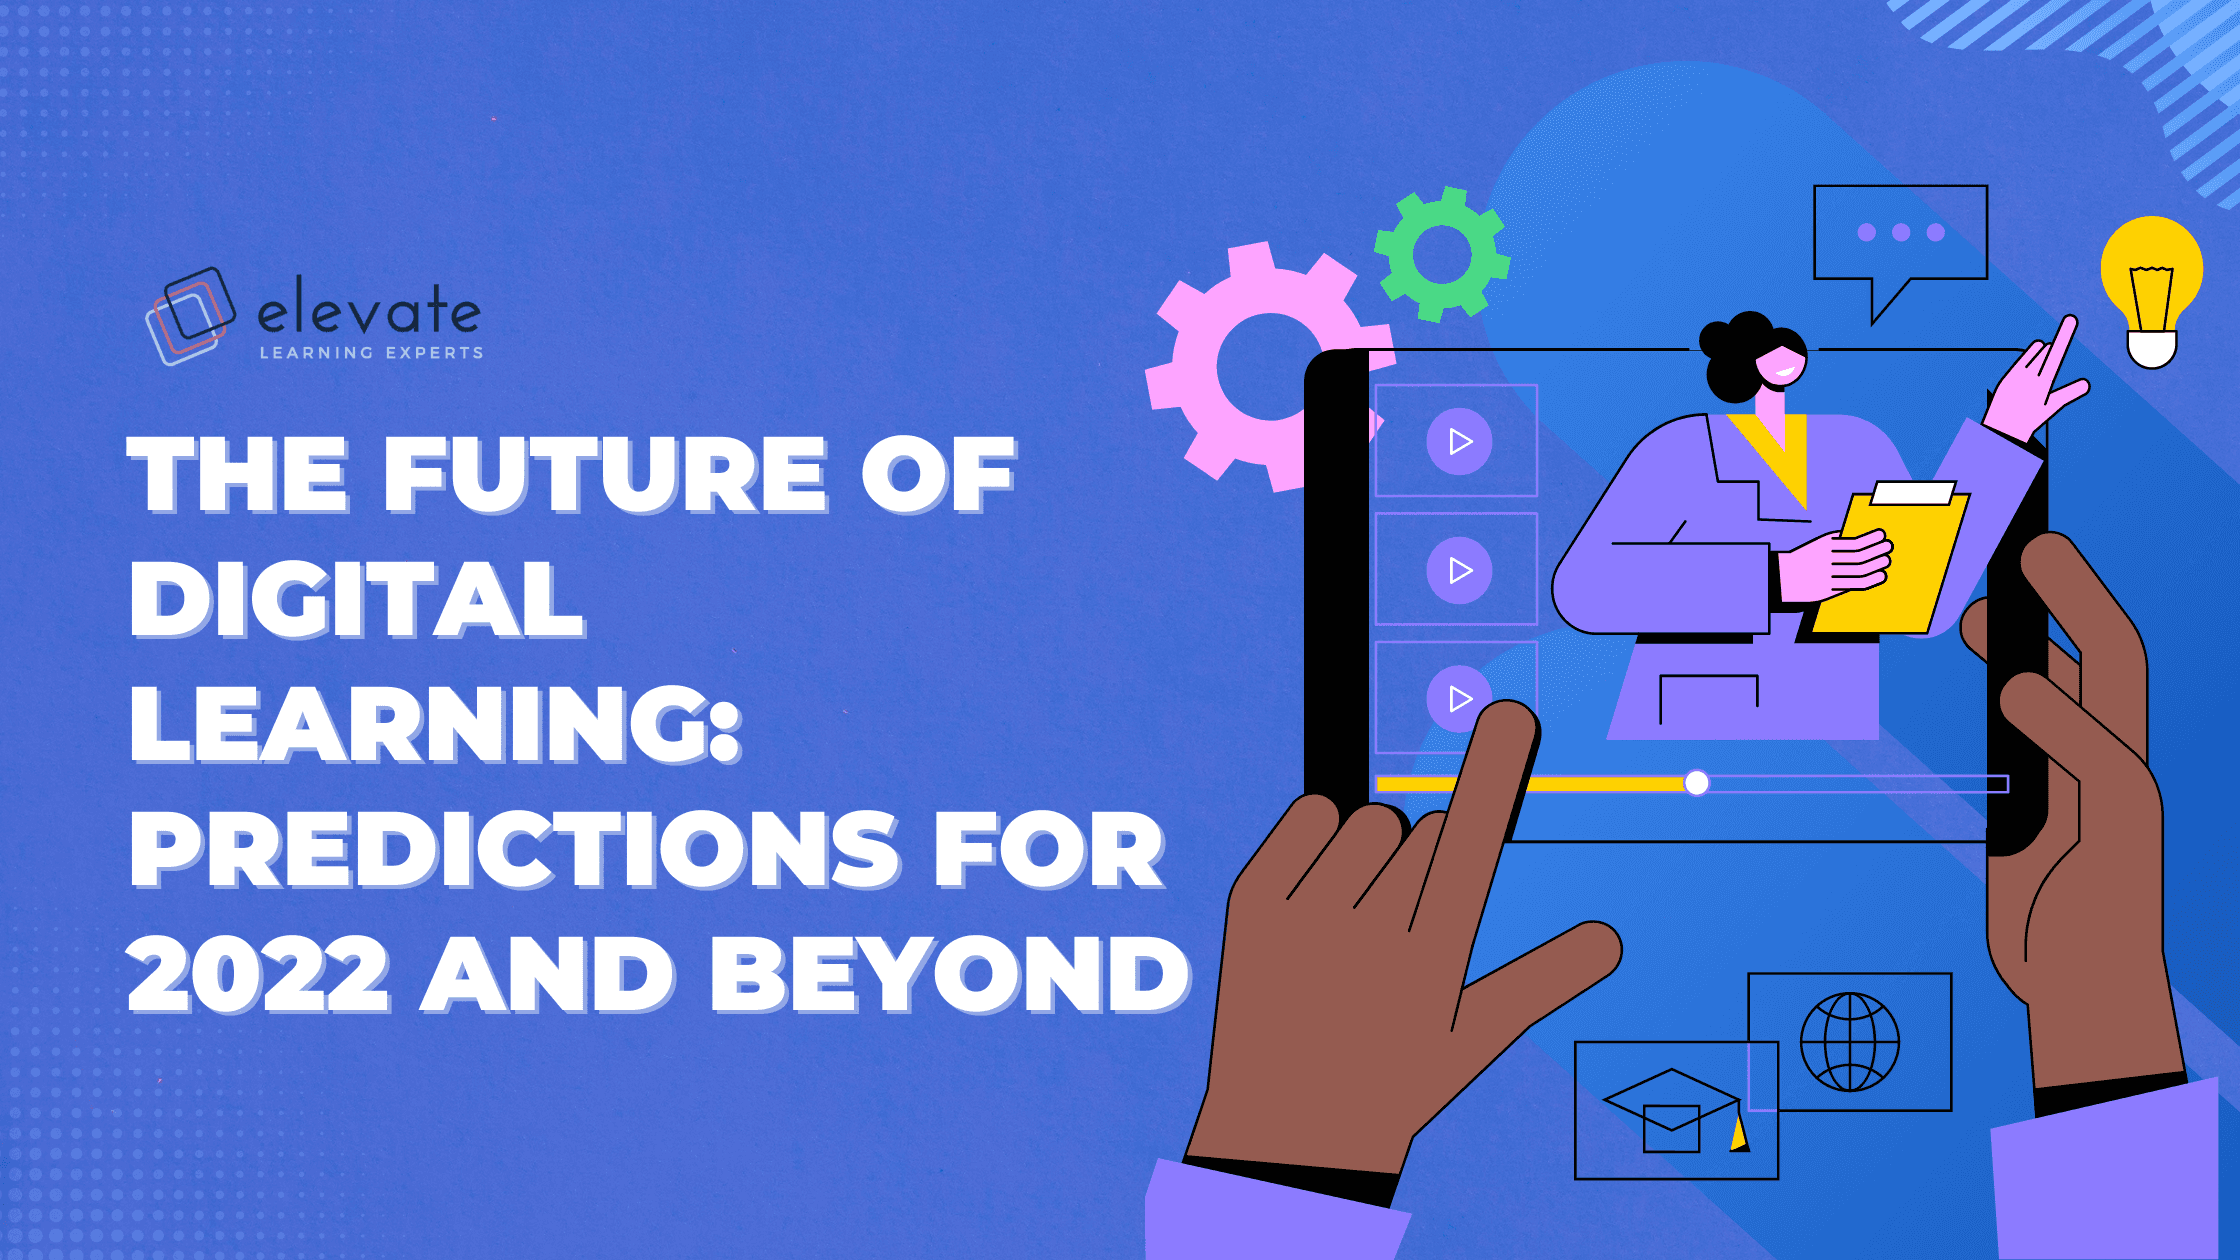 The Future of Digital Learning - Predictions for 2022 and Beyond